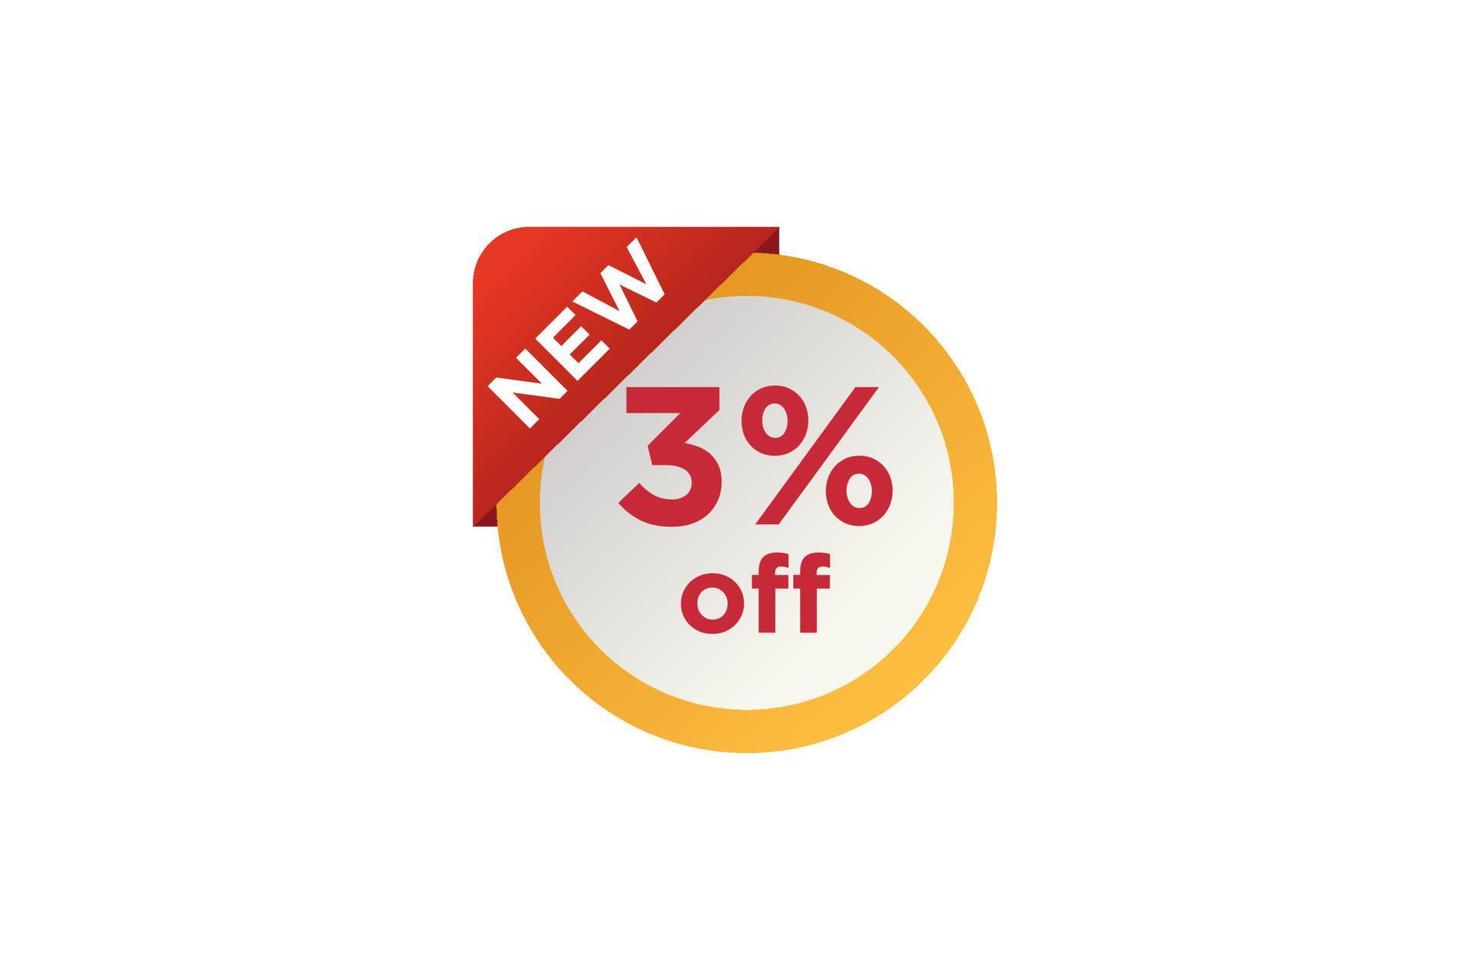 3 discount, Sales Vector badges for Labels, , Stickers, Banners, Tags, Web Stickers, New offer. Discount origami sign banner.